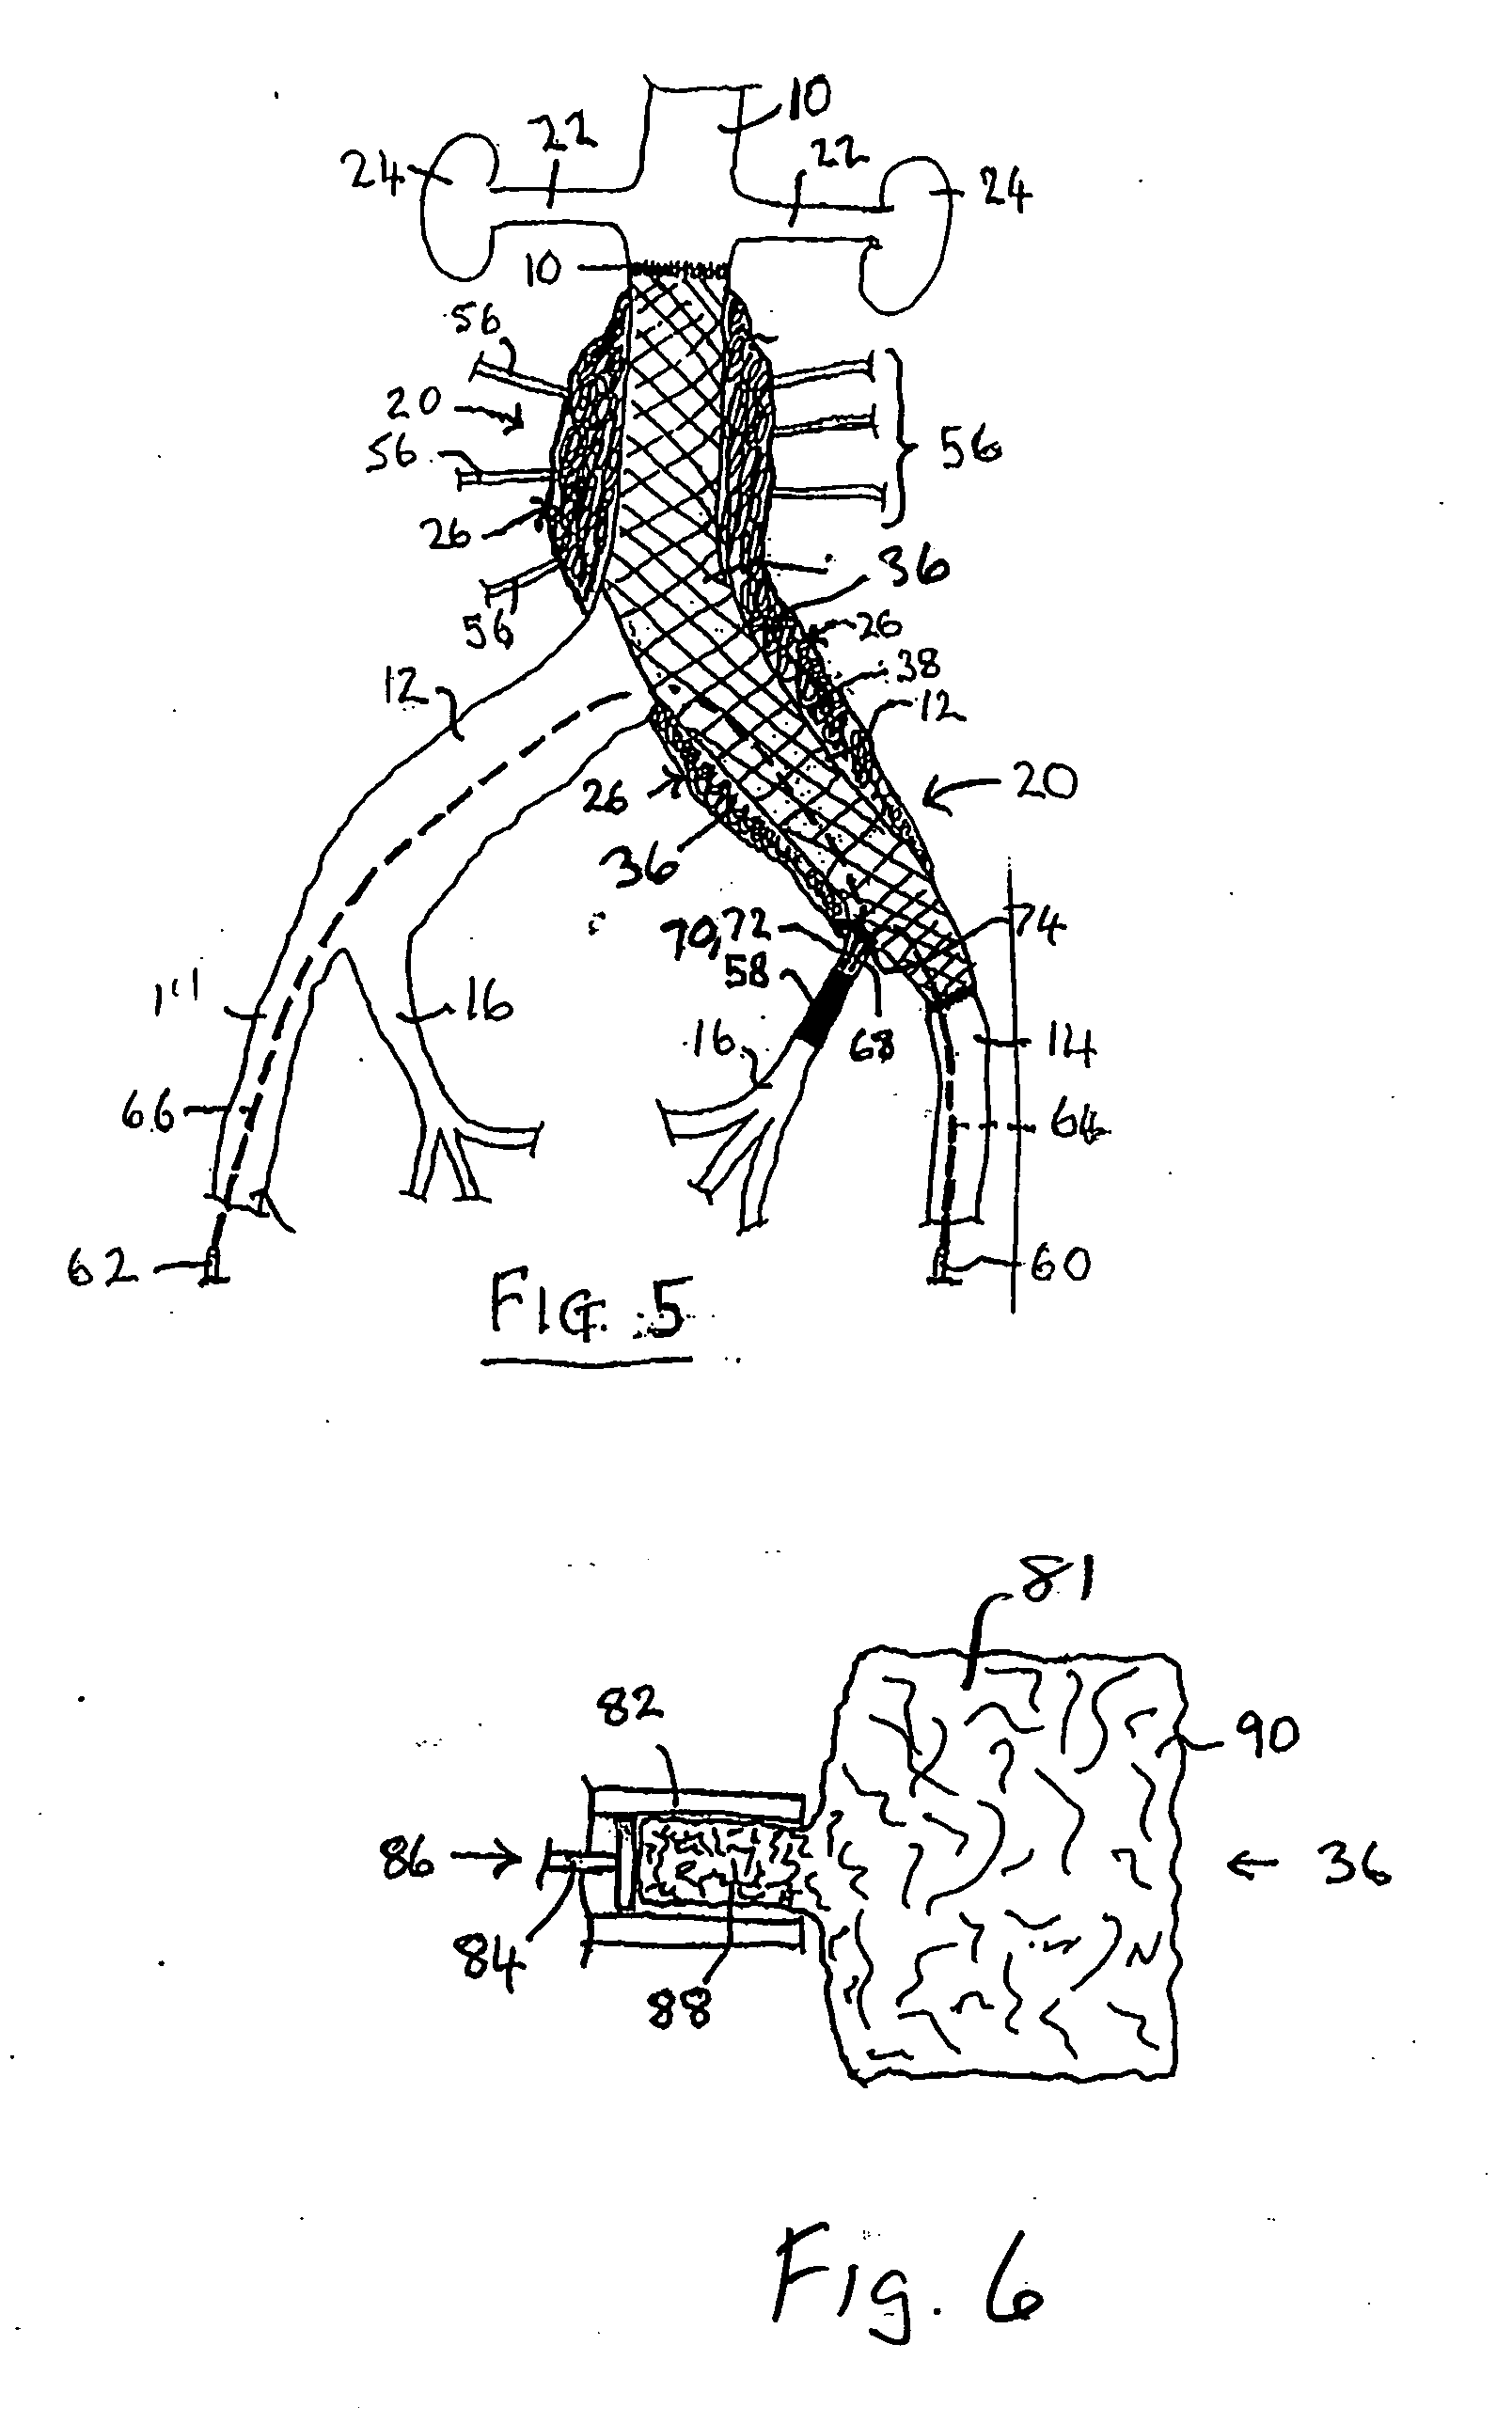 Endovascular treatment devices and methods